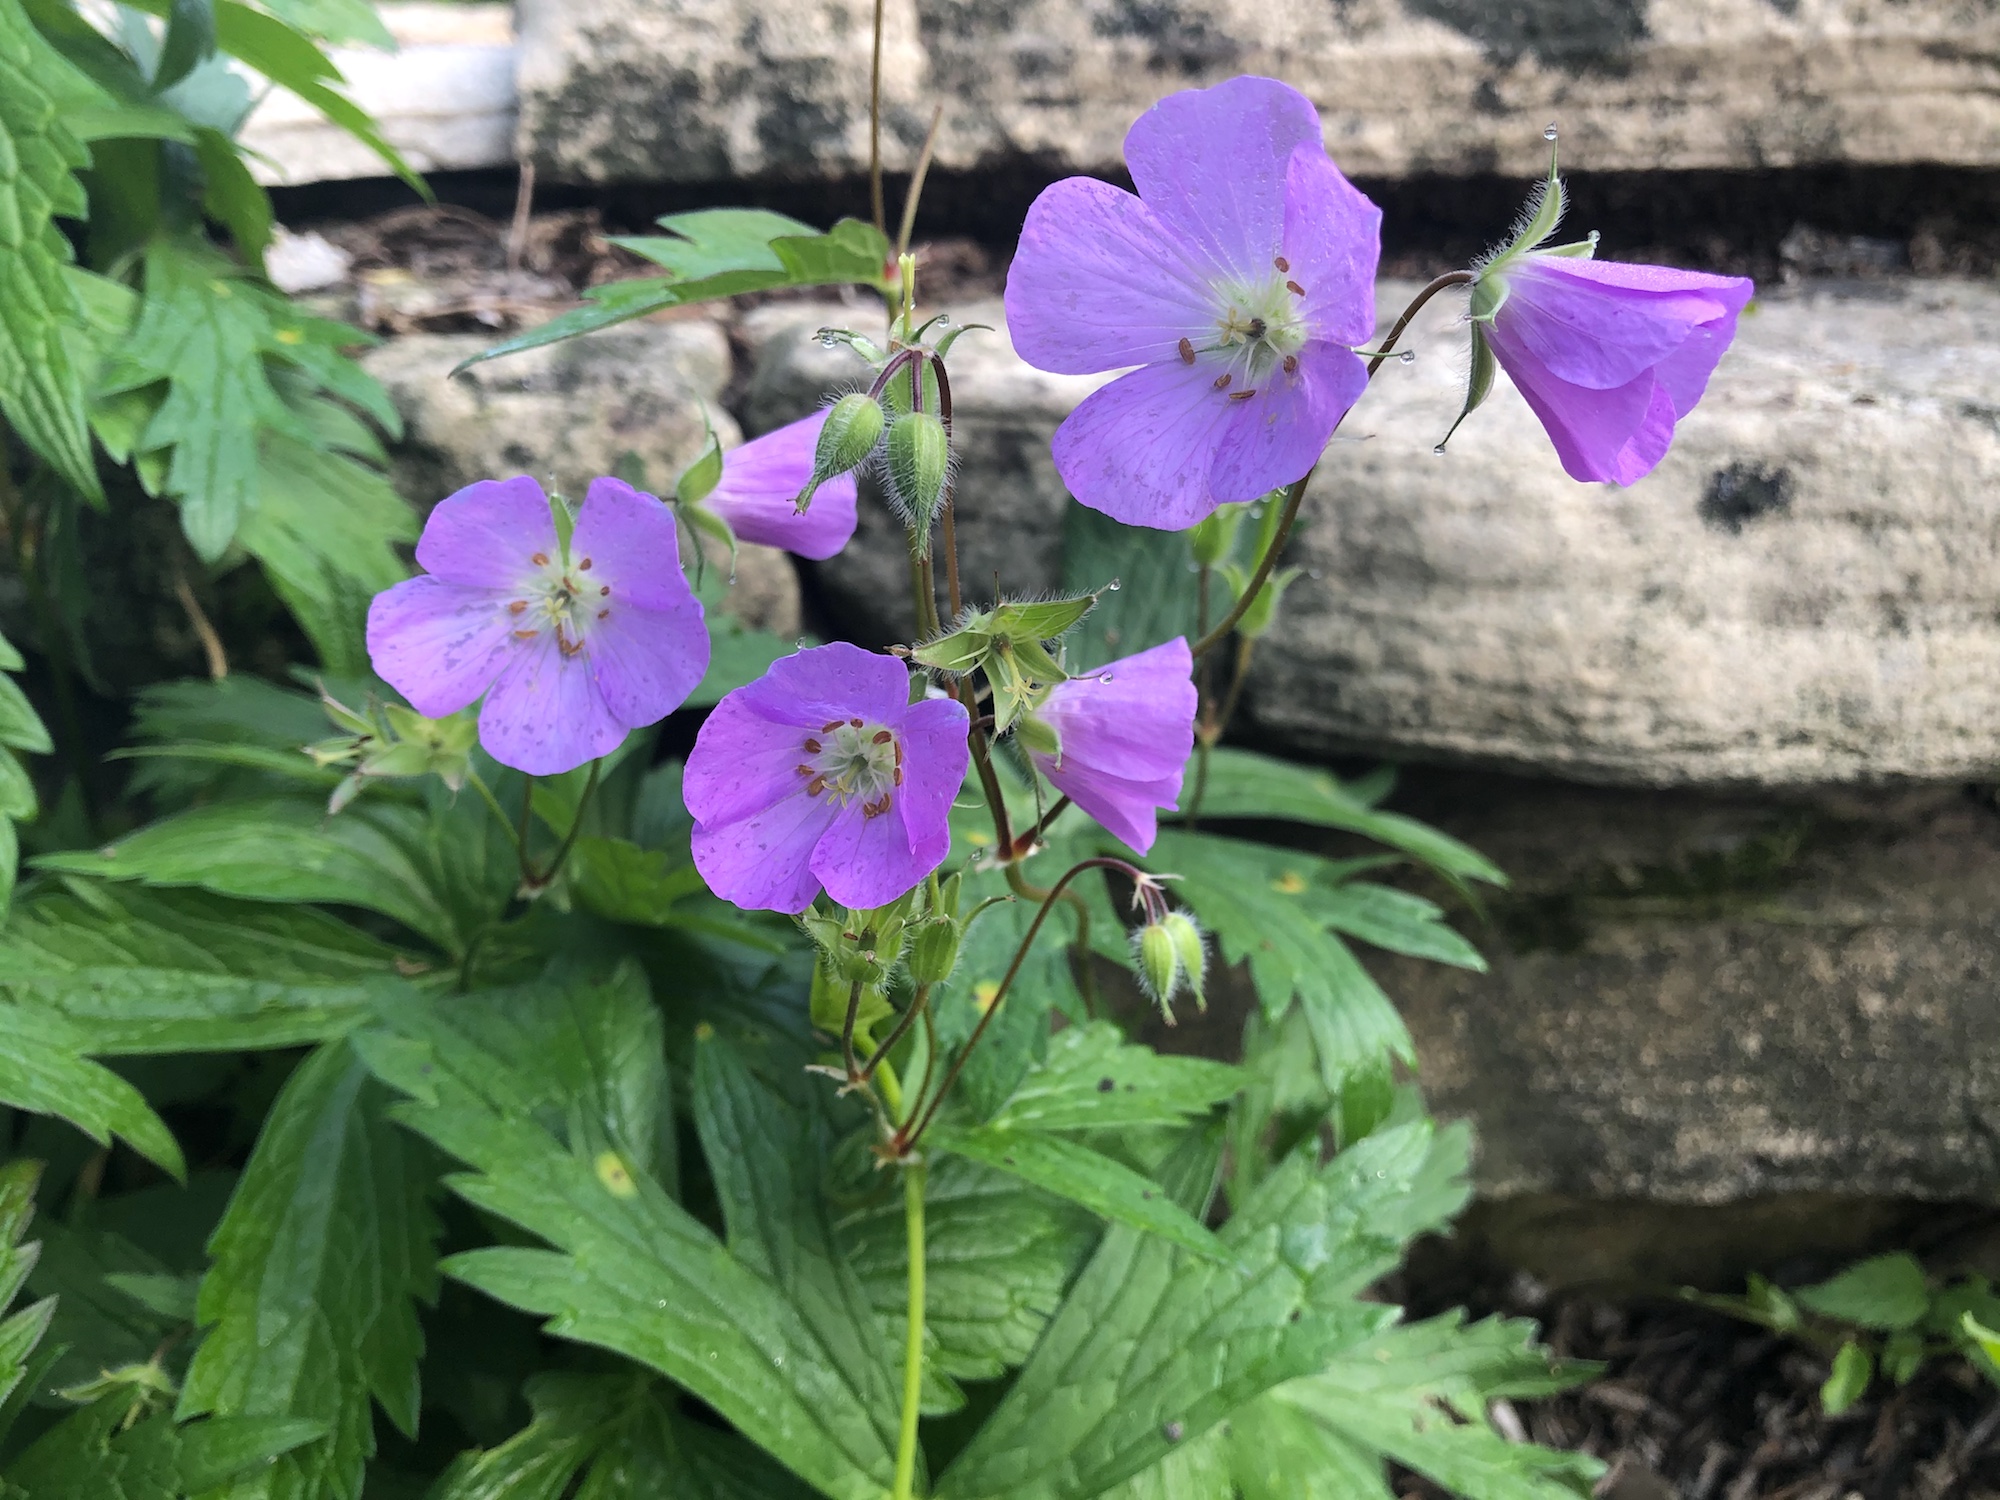 Wild Geranium by Council Ring in Oak Savanna on May 23, 2020.